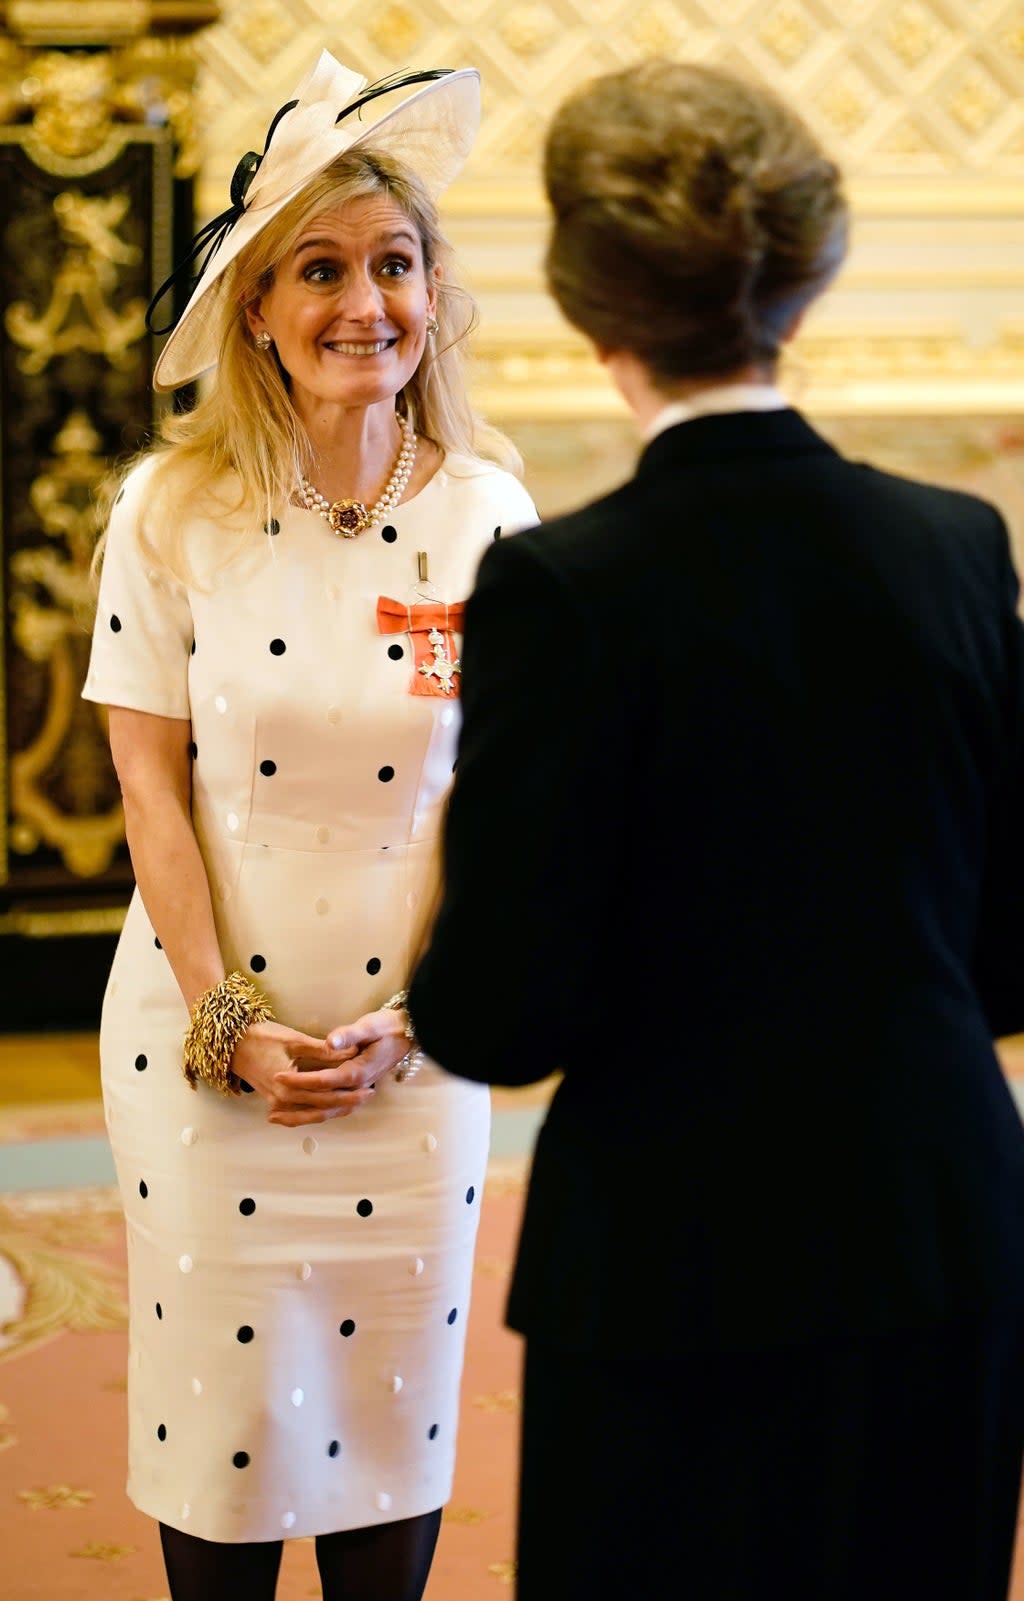 Cressida Cowell is made a MBE (Member of the Order of the British Empire) by the Princess Royal (Aaron Chown/PA) (PA Wire)